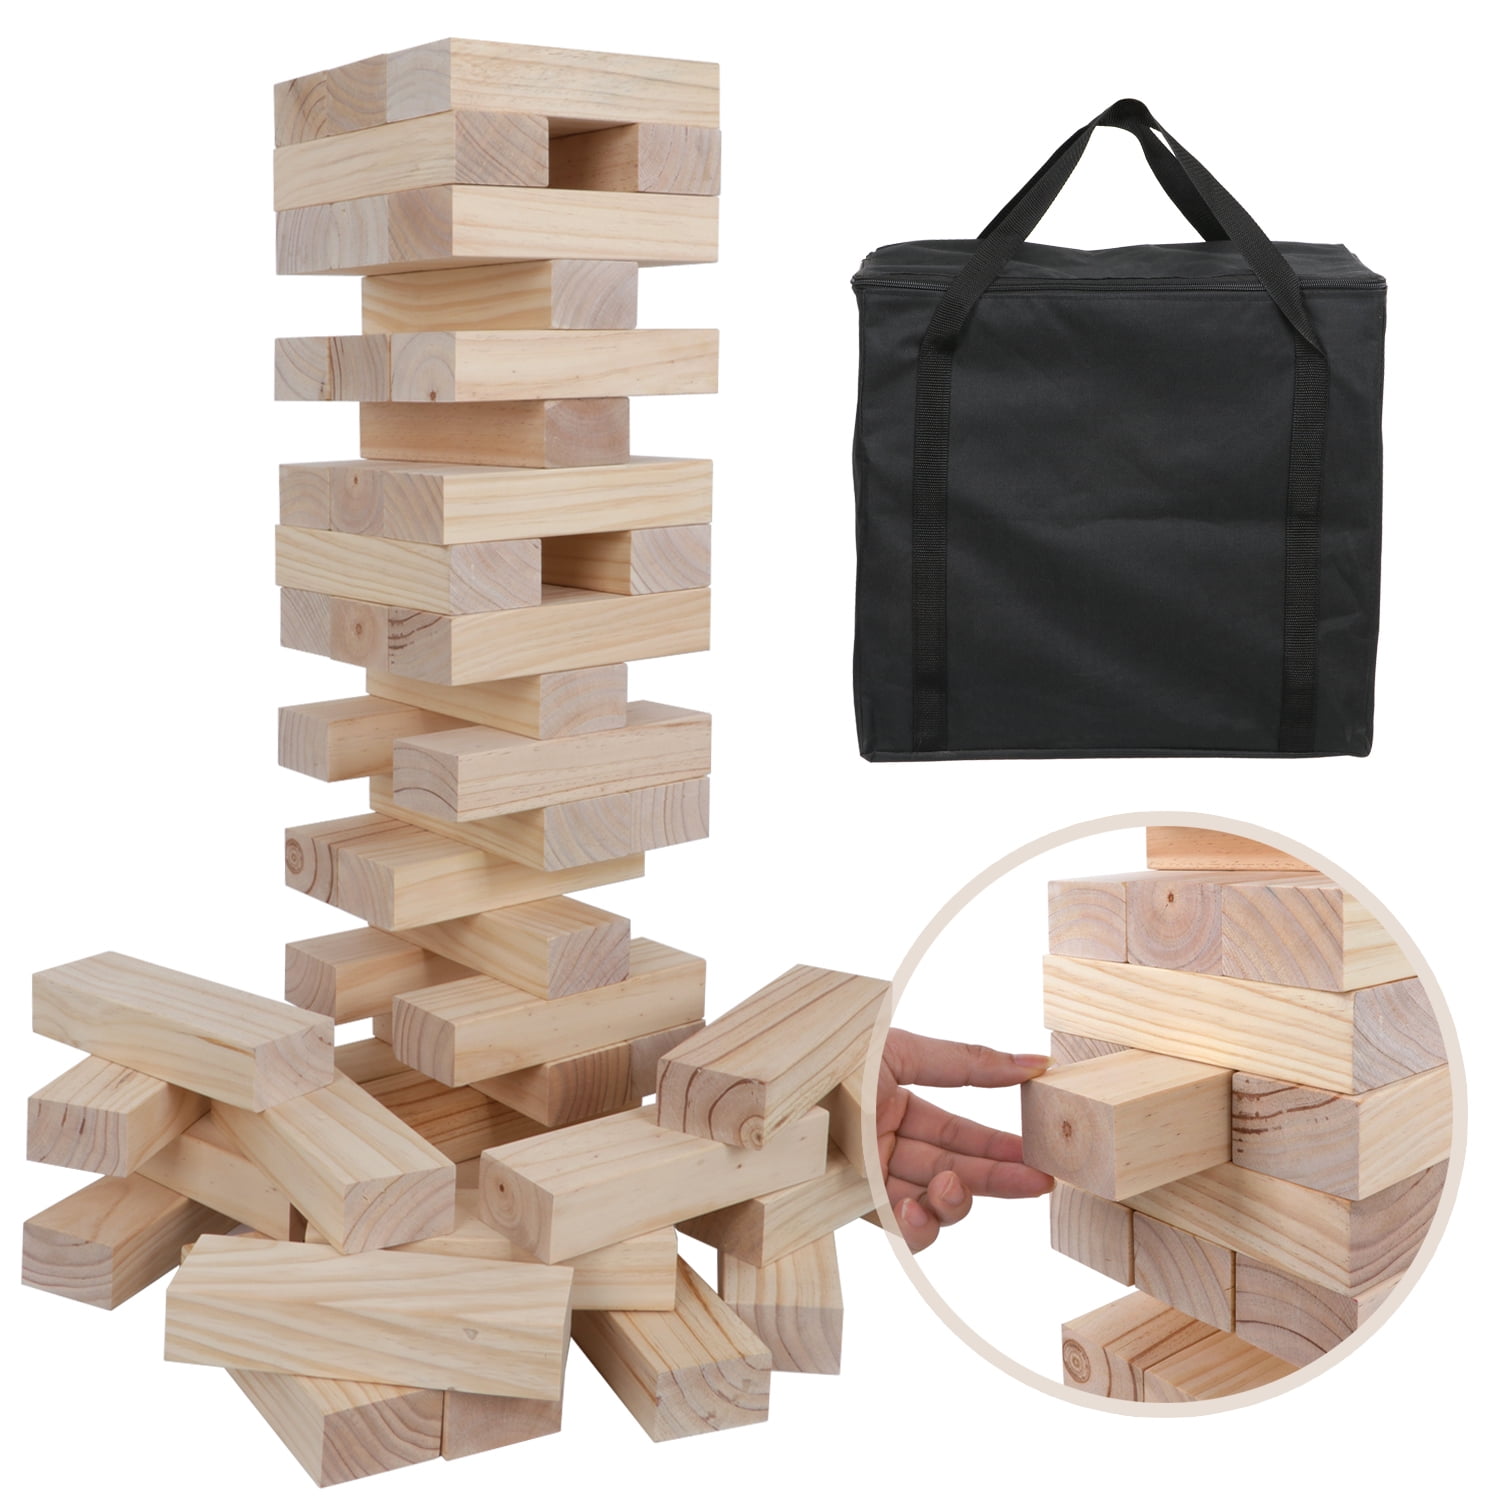 Carry Case & Storage Bag for Giant Tumble Tower Block Games by Get Outside Games 